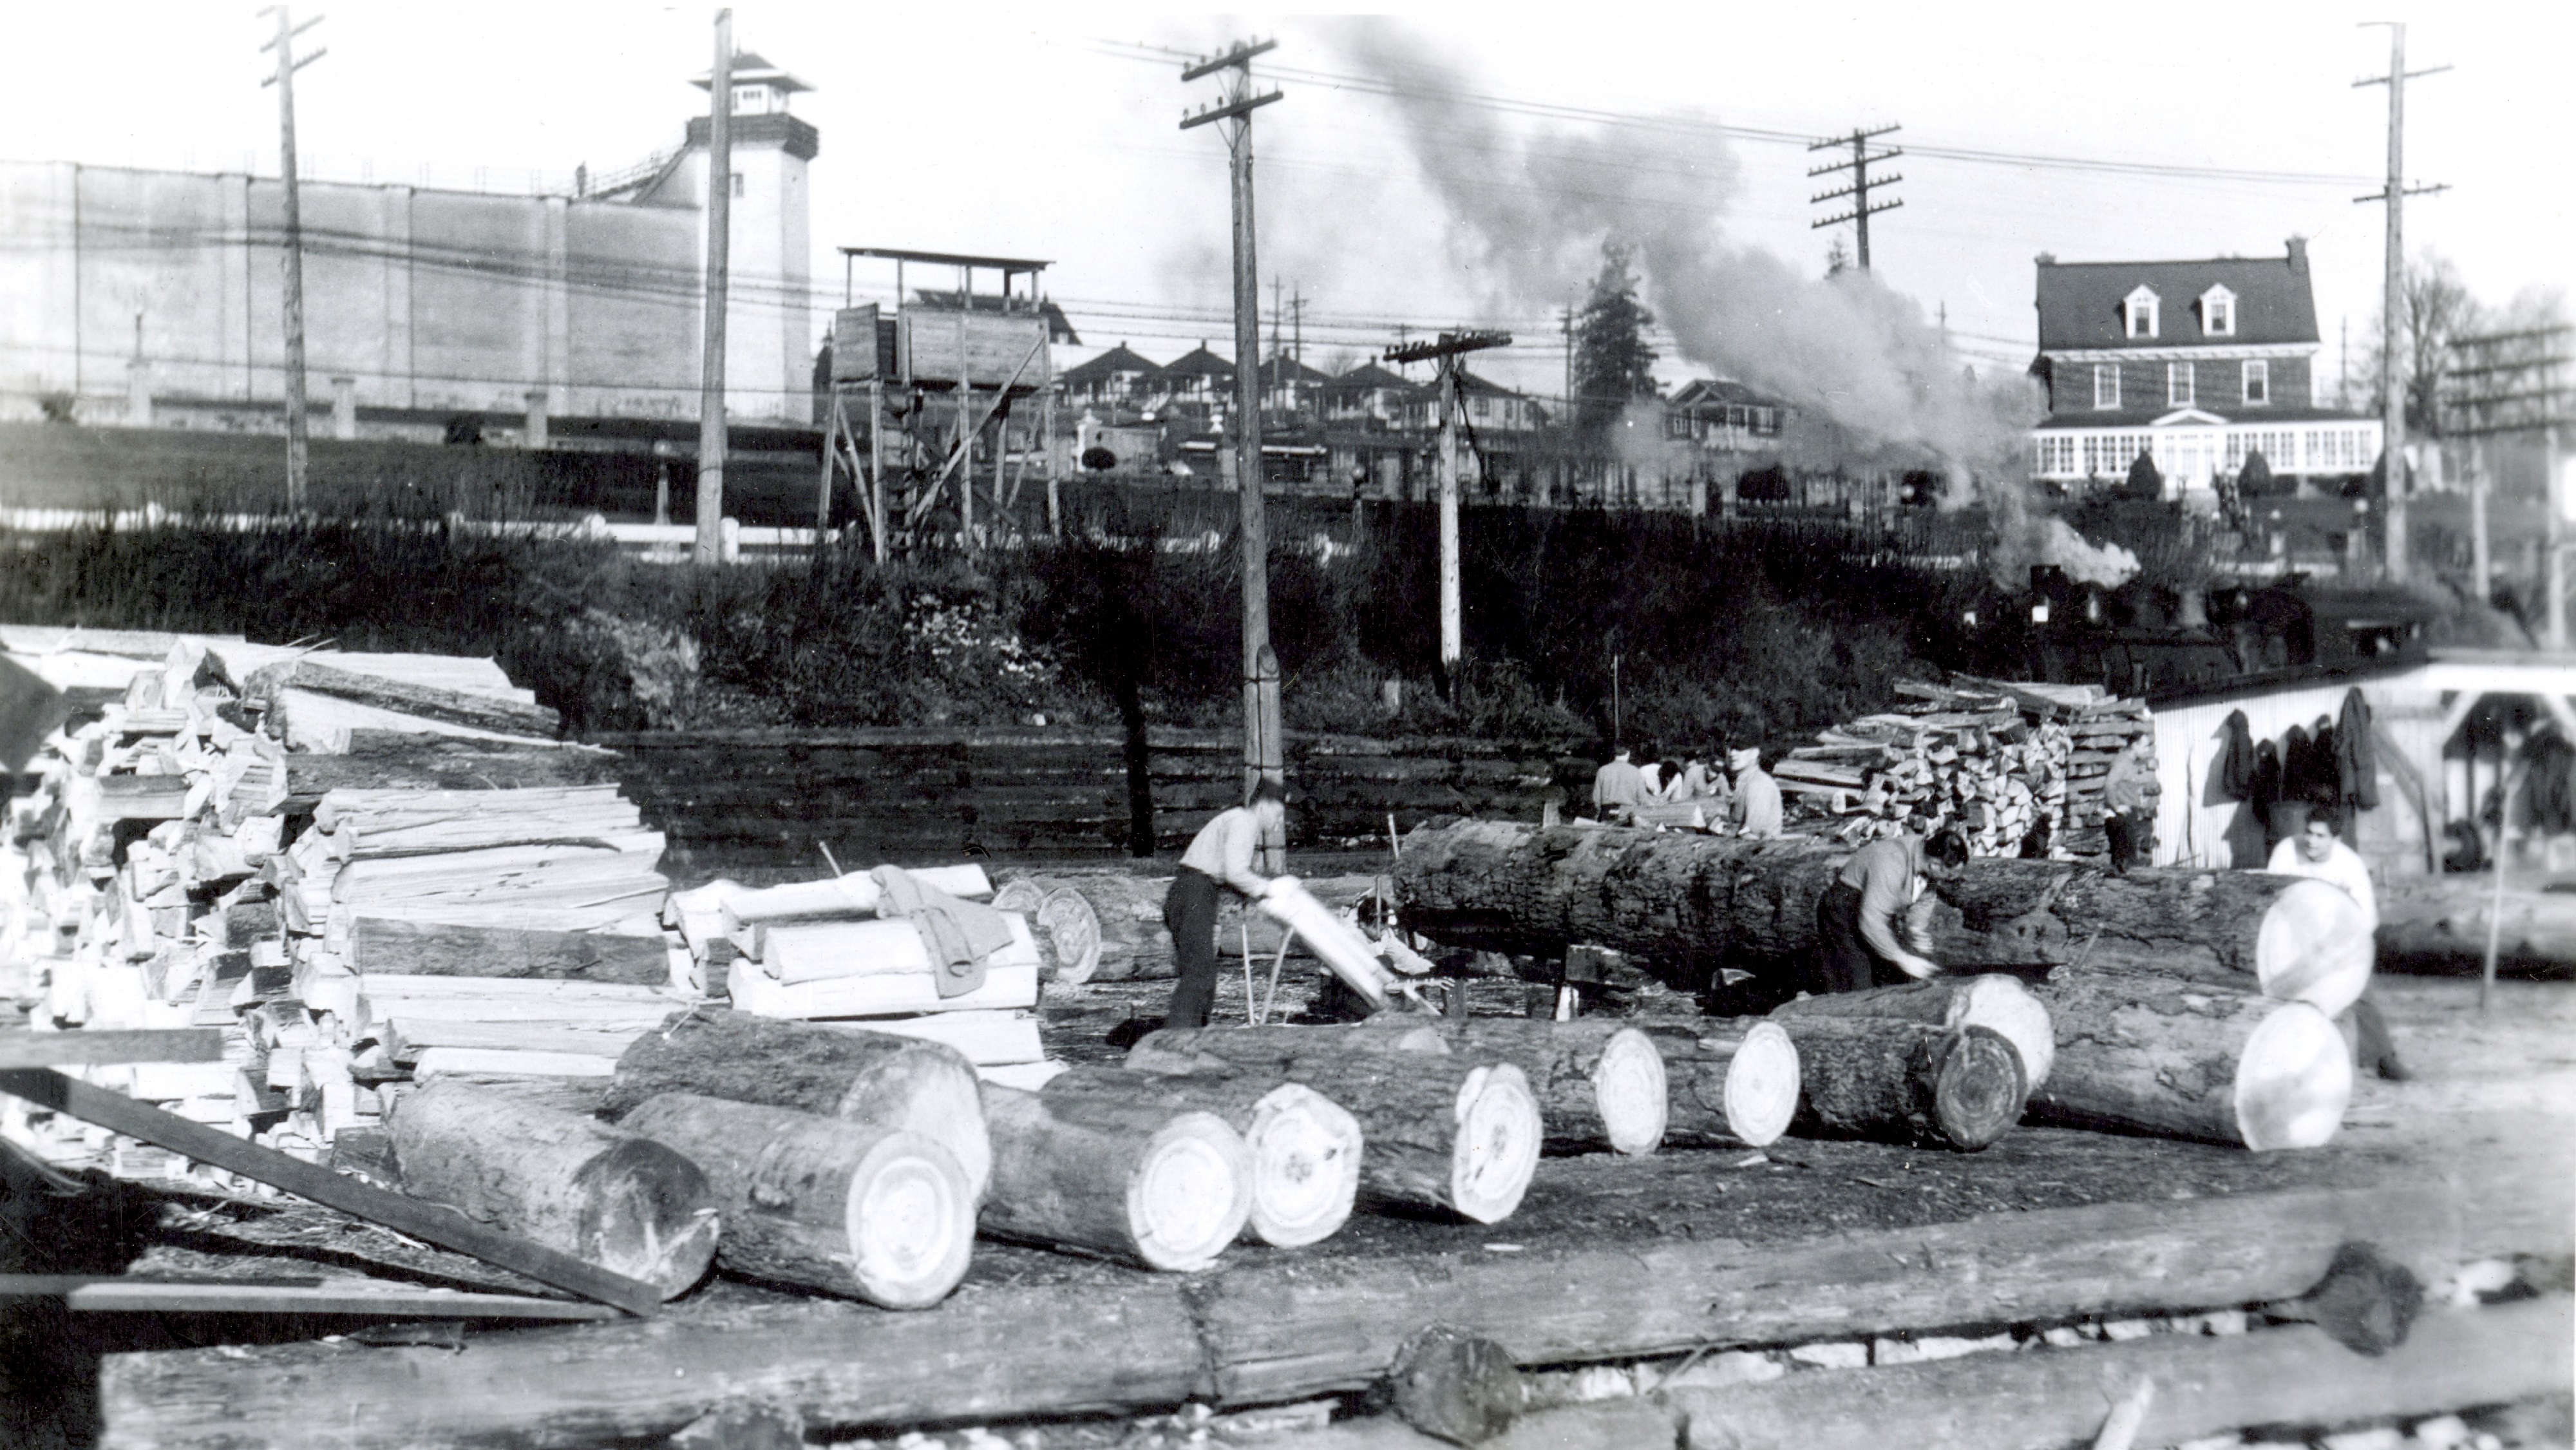 Logs piled on a dock with men sawing them